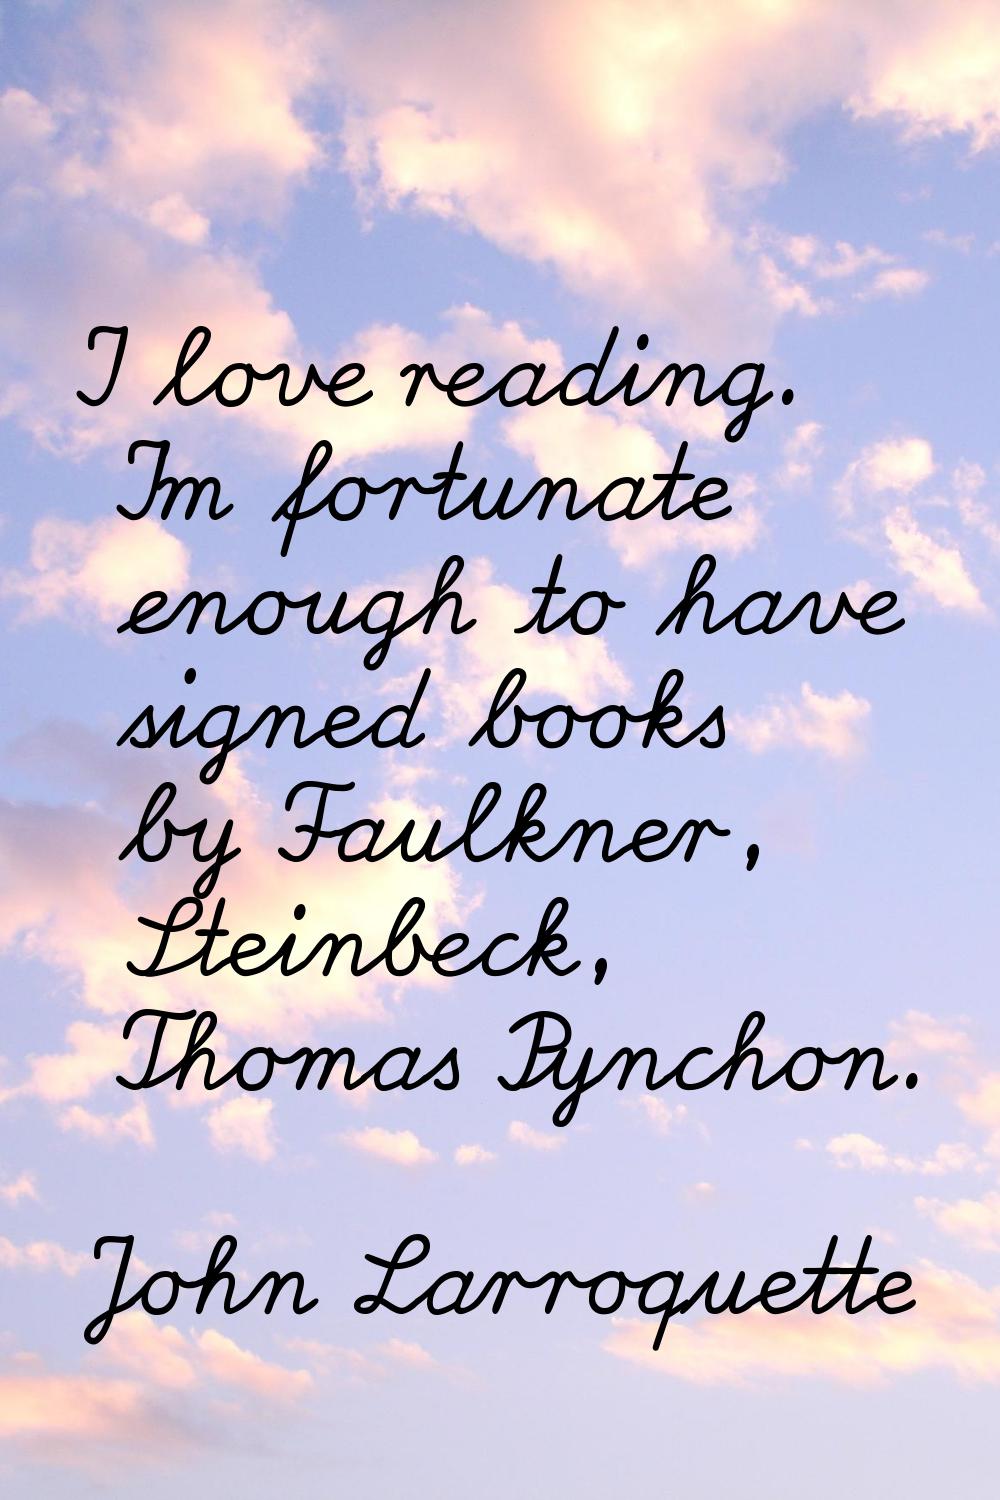 I love reading. I'm fortunate enough to have signed books by Faulkner, Steinbeck, Thomas Pynchon.